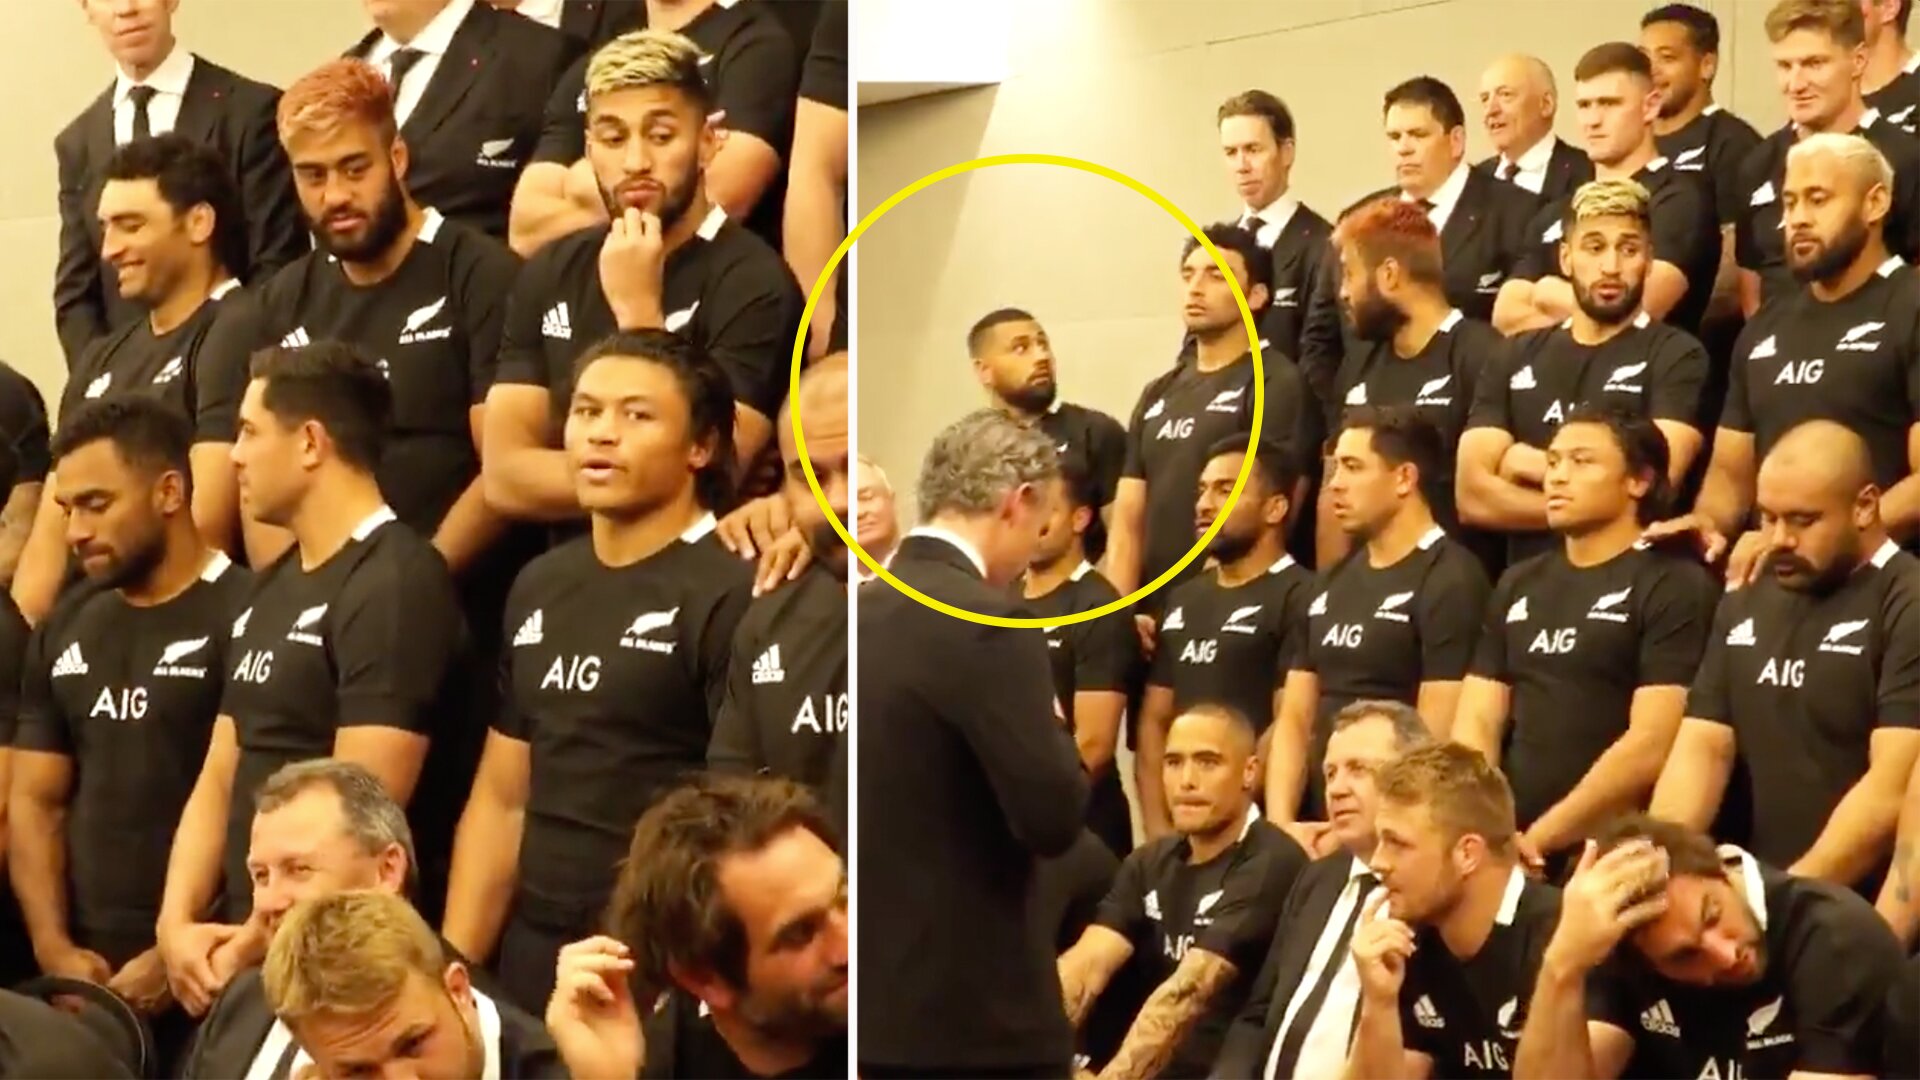 All Black players are going viral for what unexpectedly happened during this routine team photo